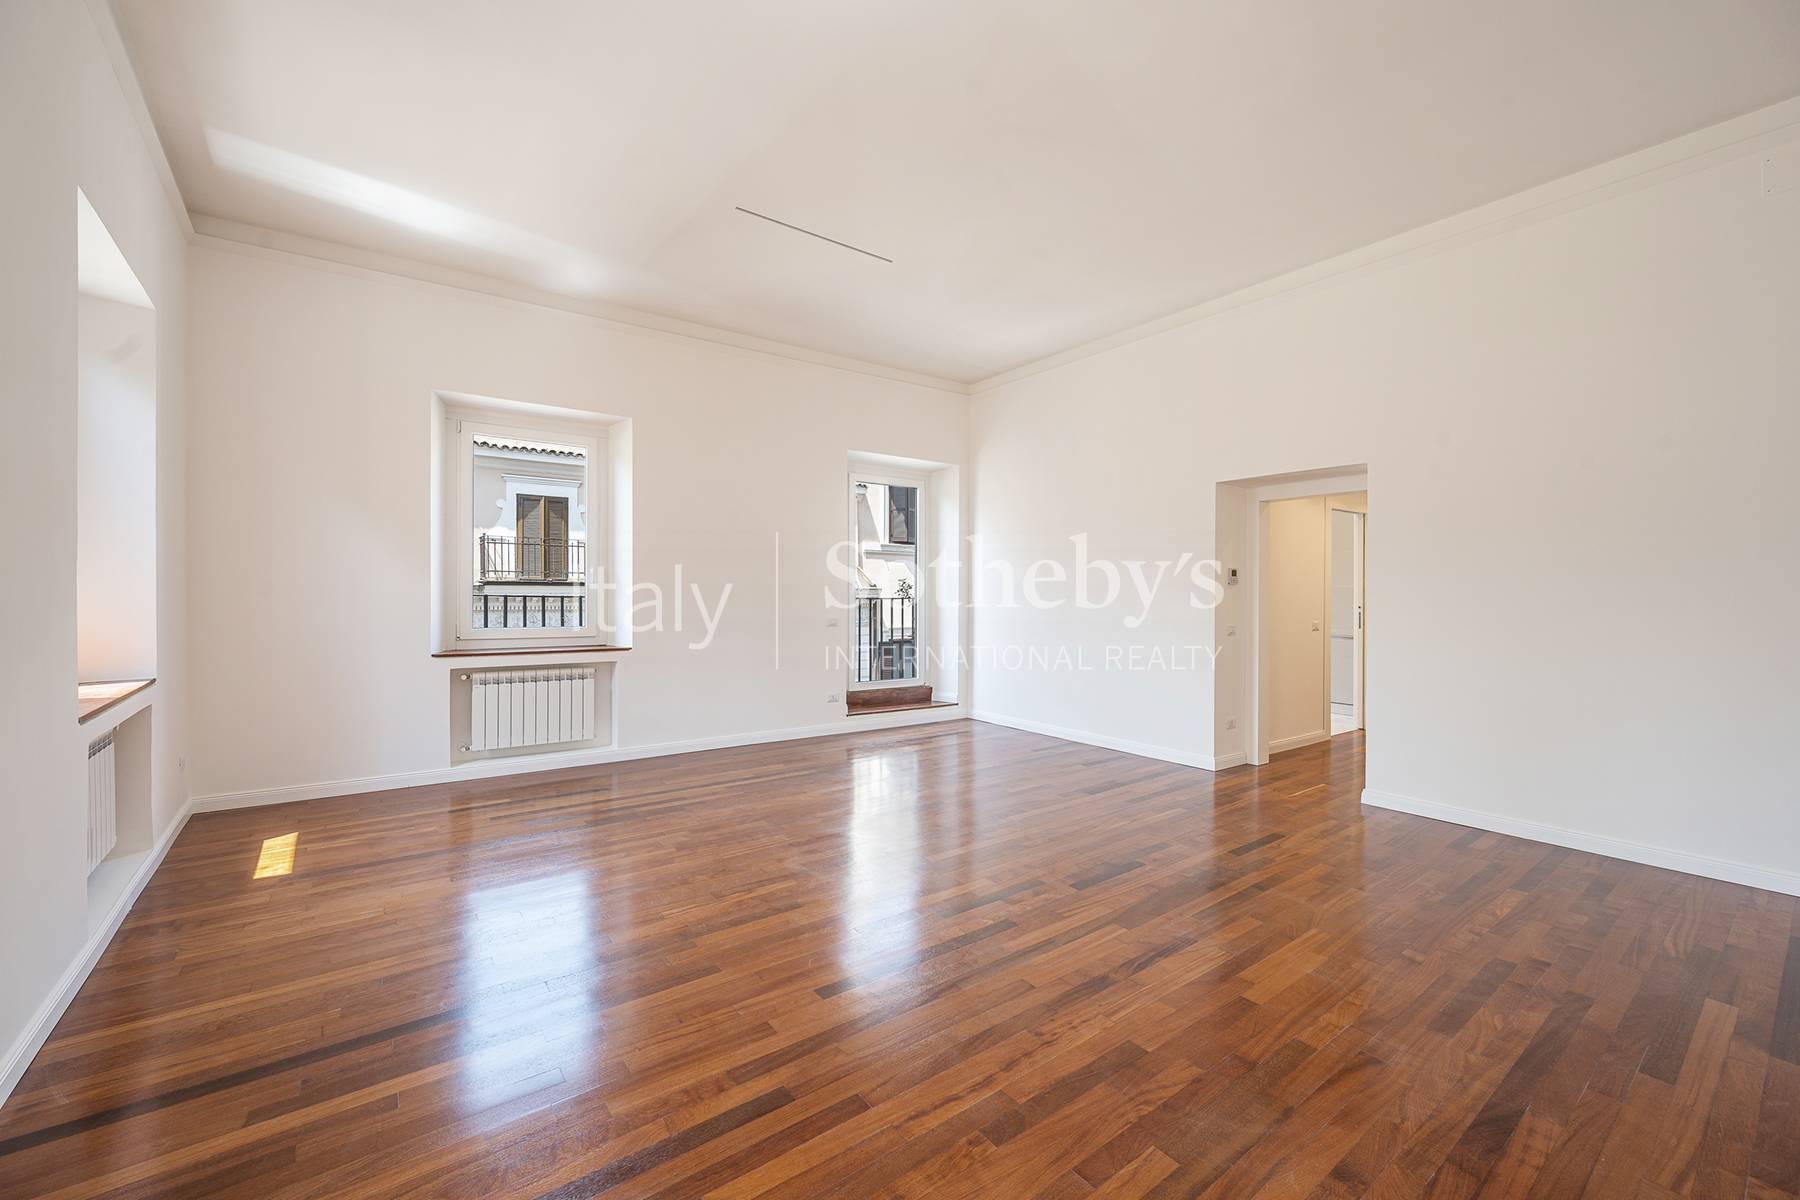 Charming apartment a stone's throw from Piazza del Popolo - 3